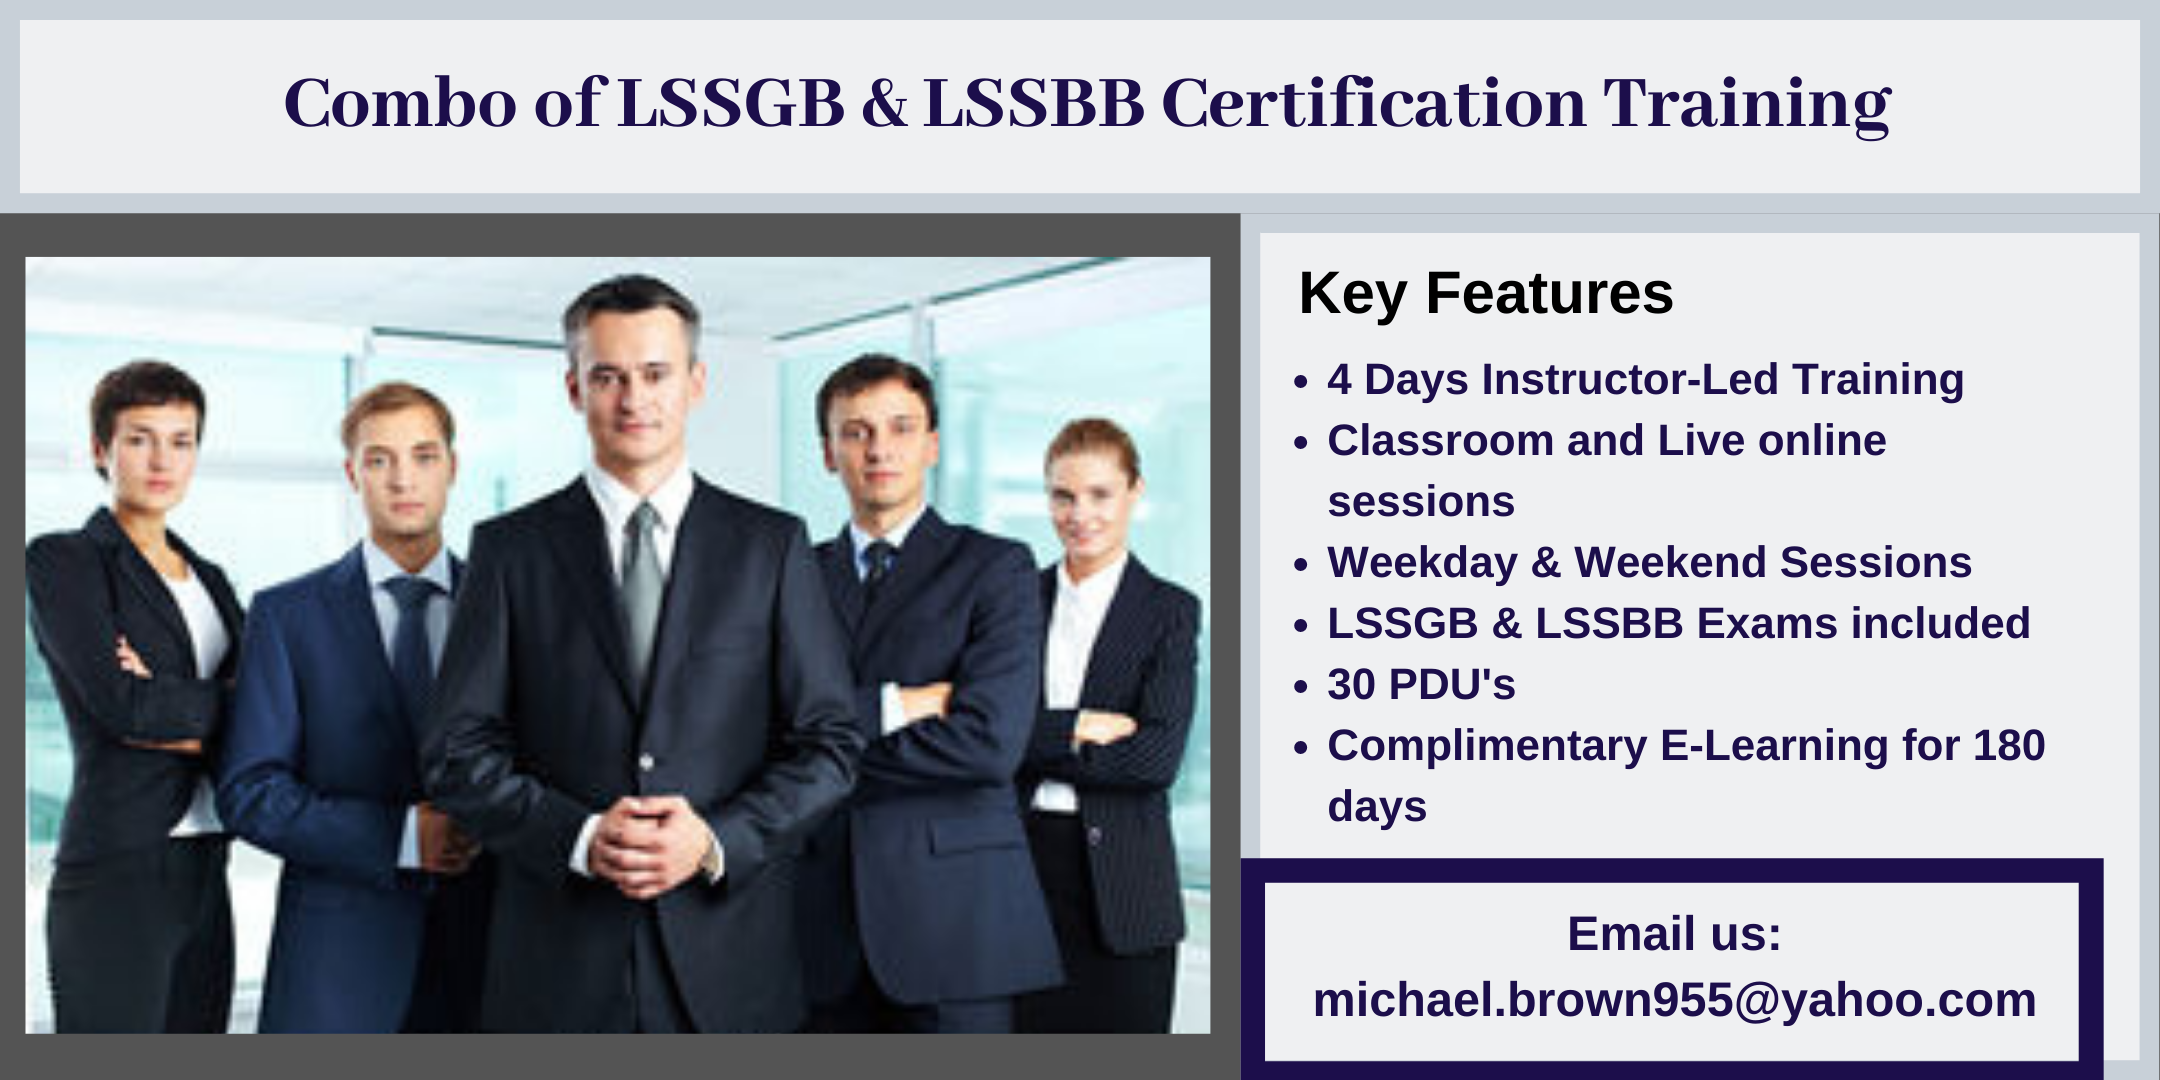 Combo of LSSGB & LSSBB 4 days Certification Training in EastLos Angeles, CA